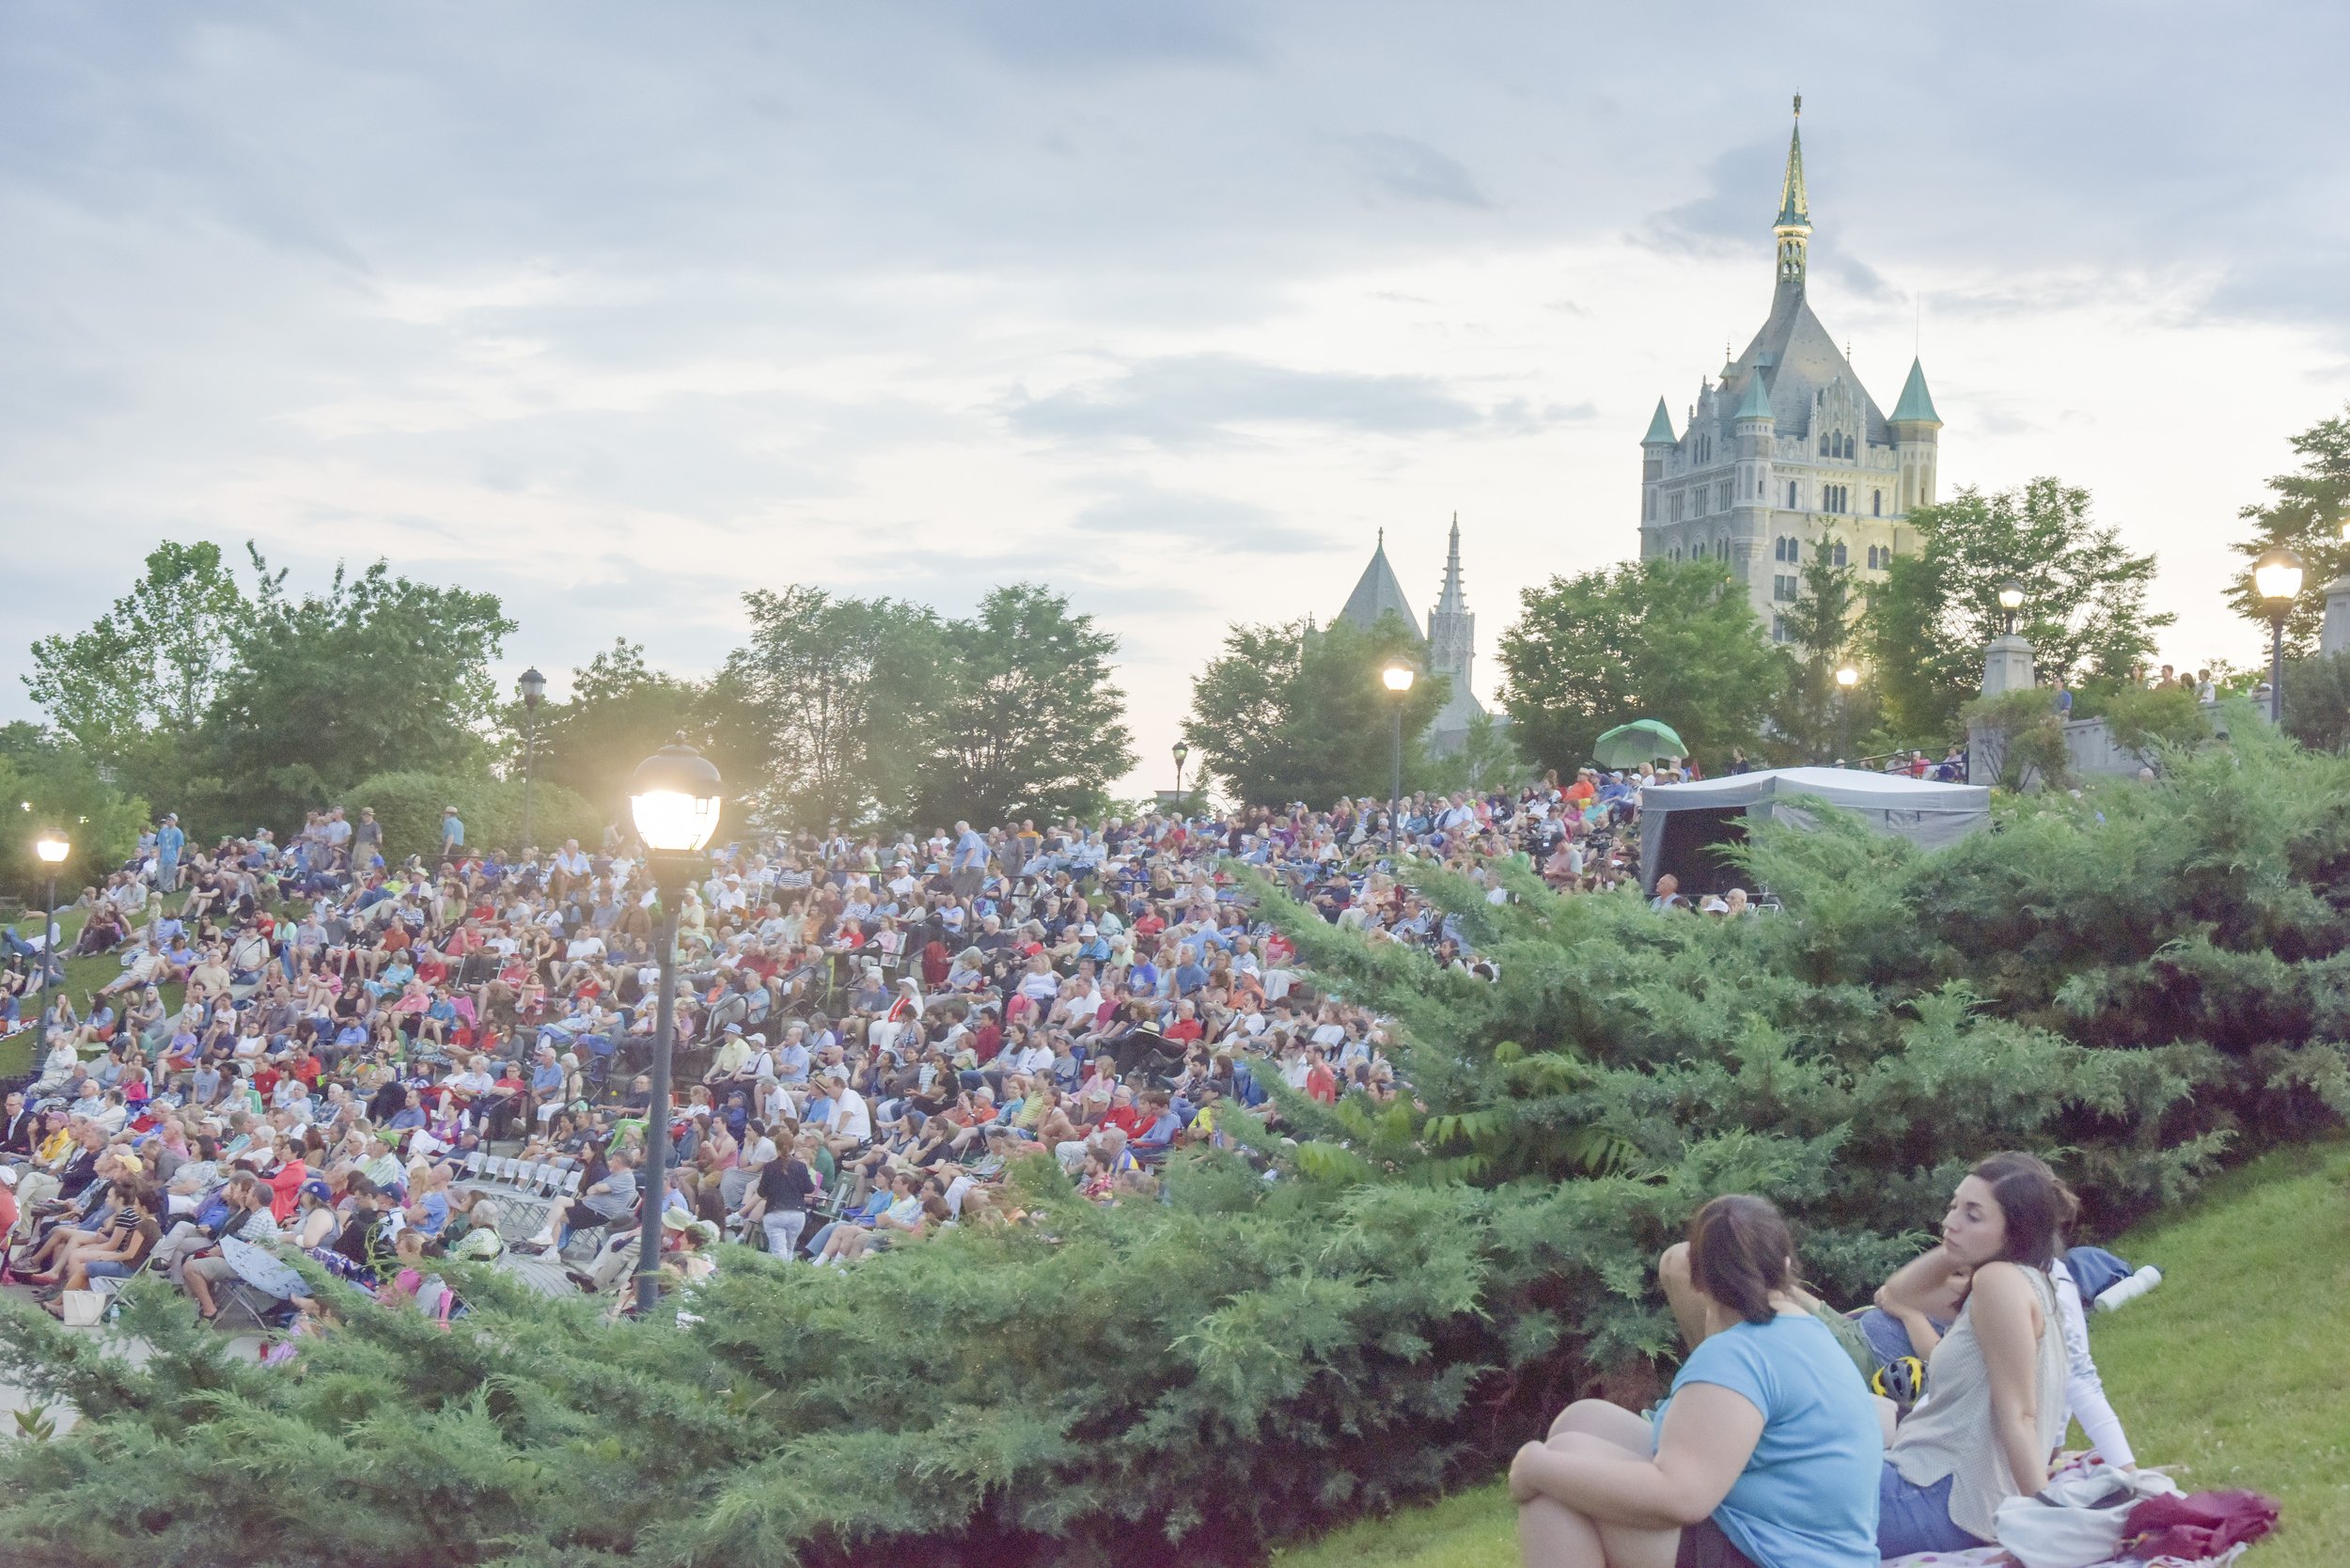  A free outdoor concert featuring Aaron Copland, Viet Cuong, and more will kick off at 7:30pm. 